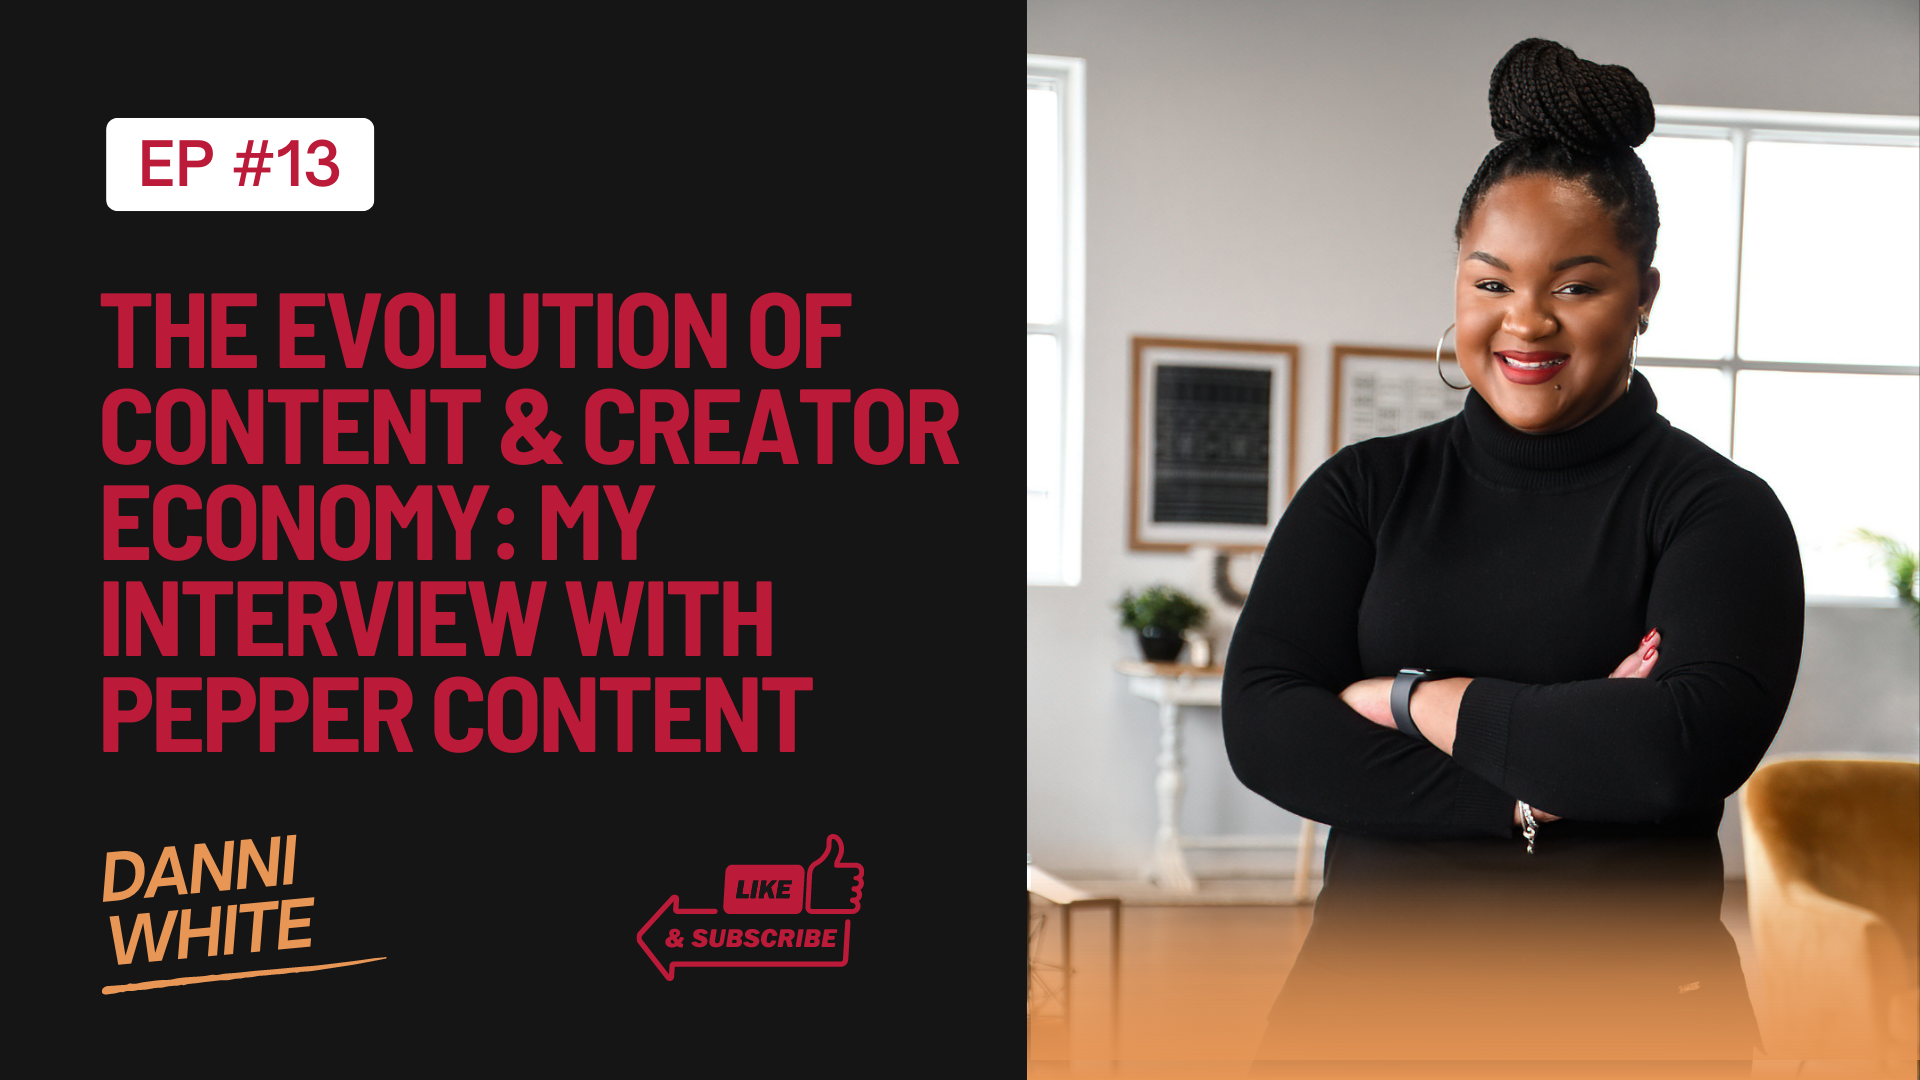 Episode #13: The Evolution of Content & Creator Economy: My Interview with Pepper Content